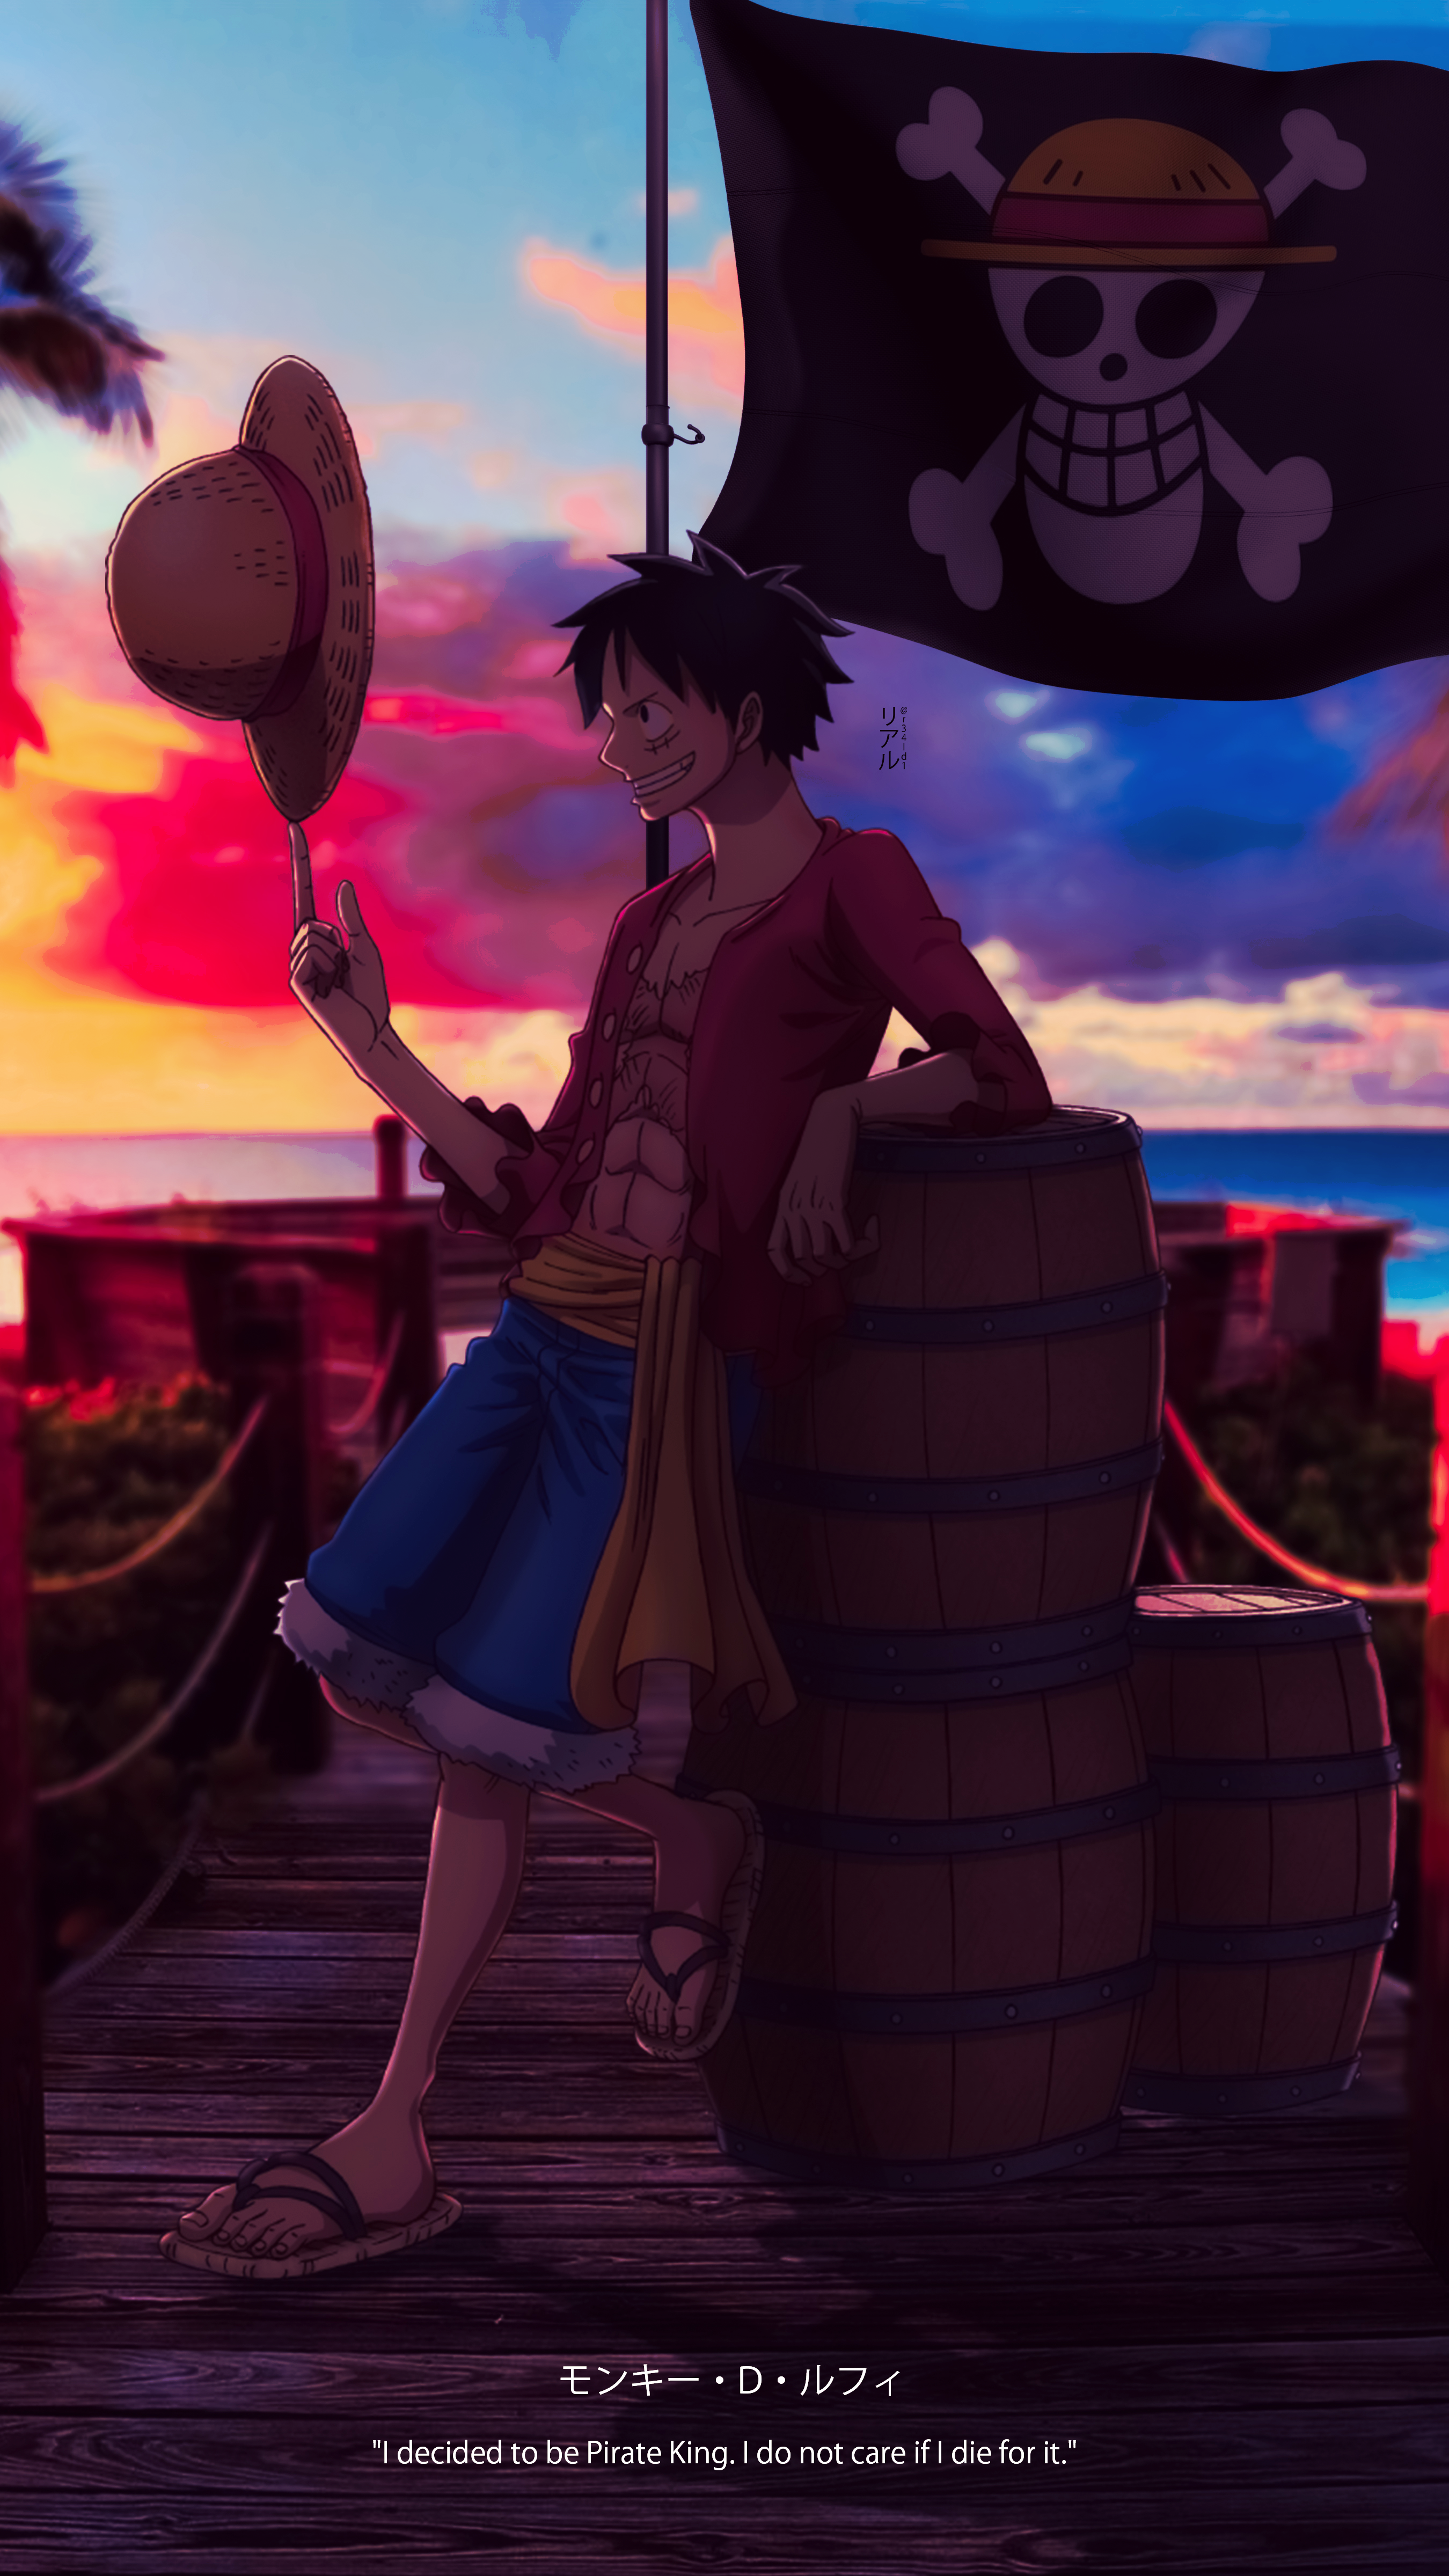 Anime 2700x4800 One Piece Monkey D. Luffy portrait display anime boys straw hat Barrel sky clouds flip flops smiling scars flag sunset sunset glow sunlight Japanese text